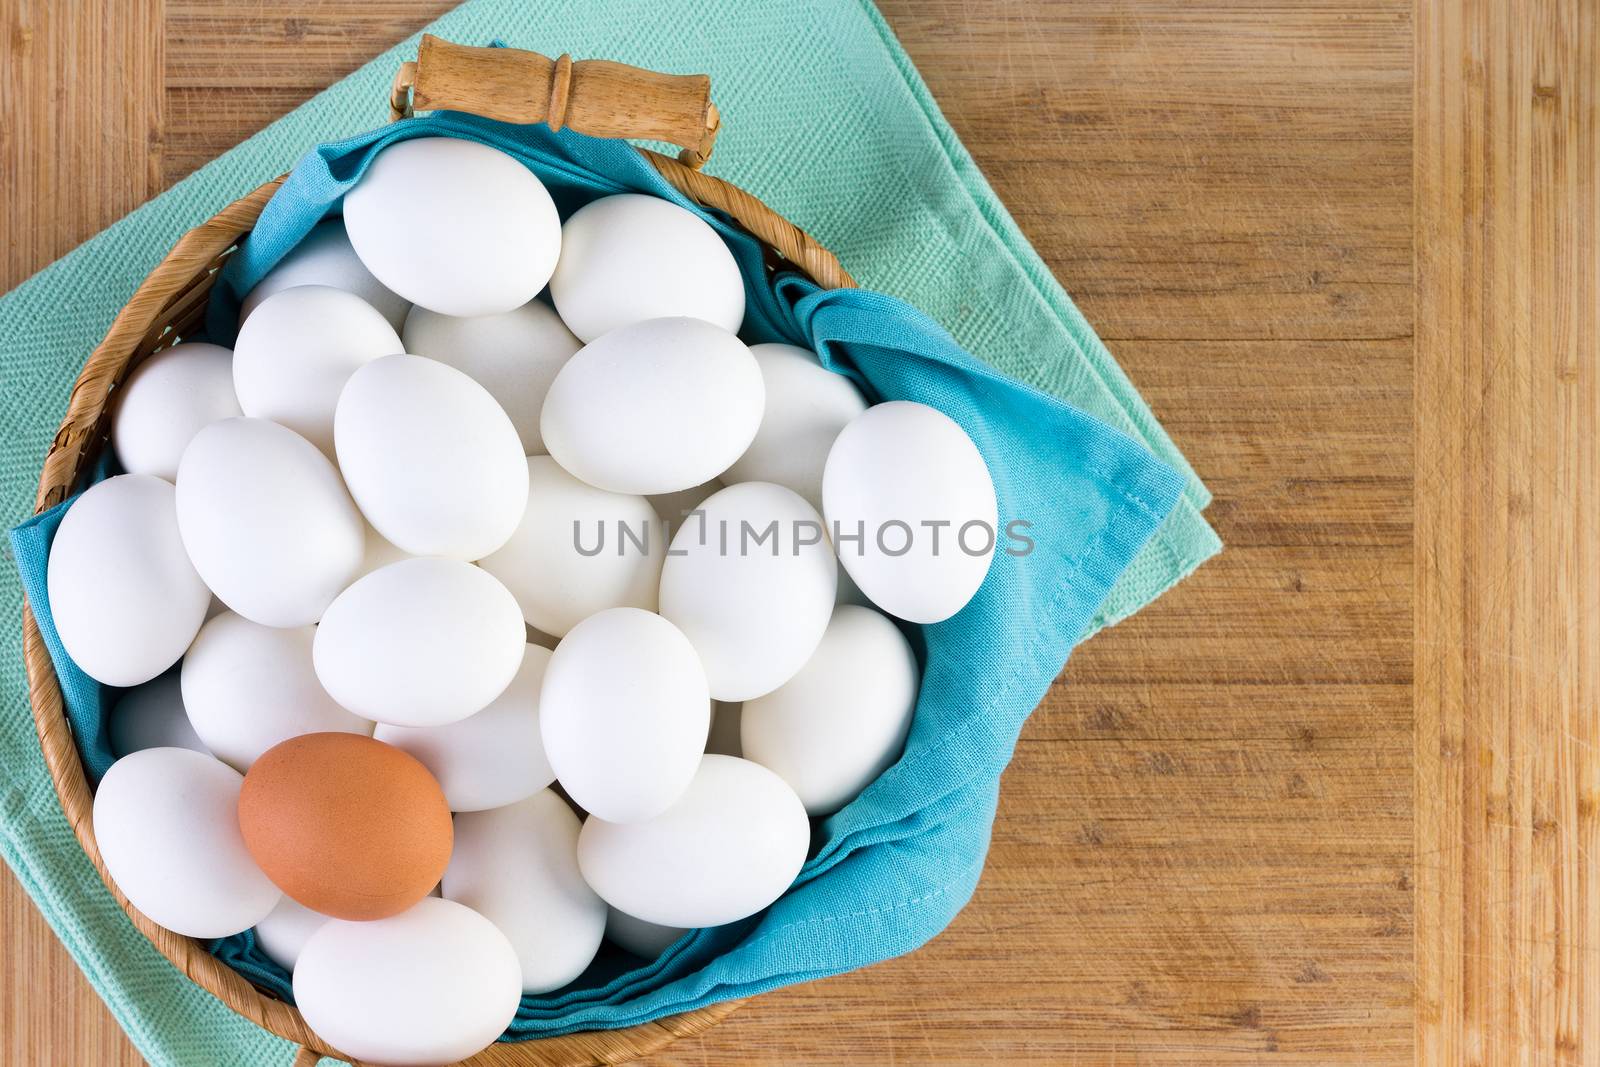 Wicker basket full of white eggs with one brown egg on the top in a conceptual image of diversity and individualism, overhead view on a wooden board background with copy space